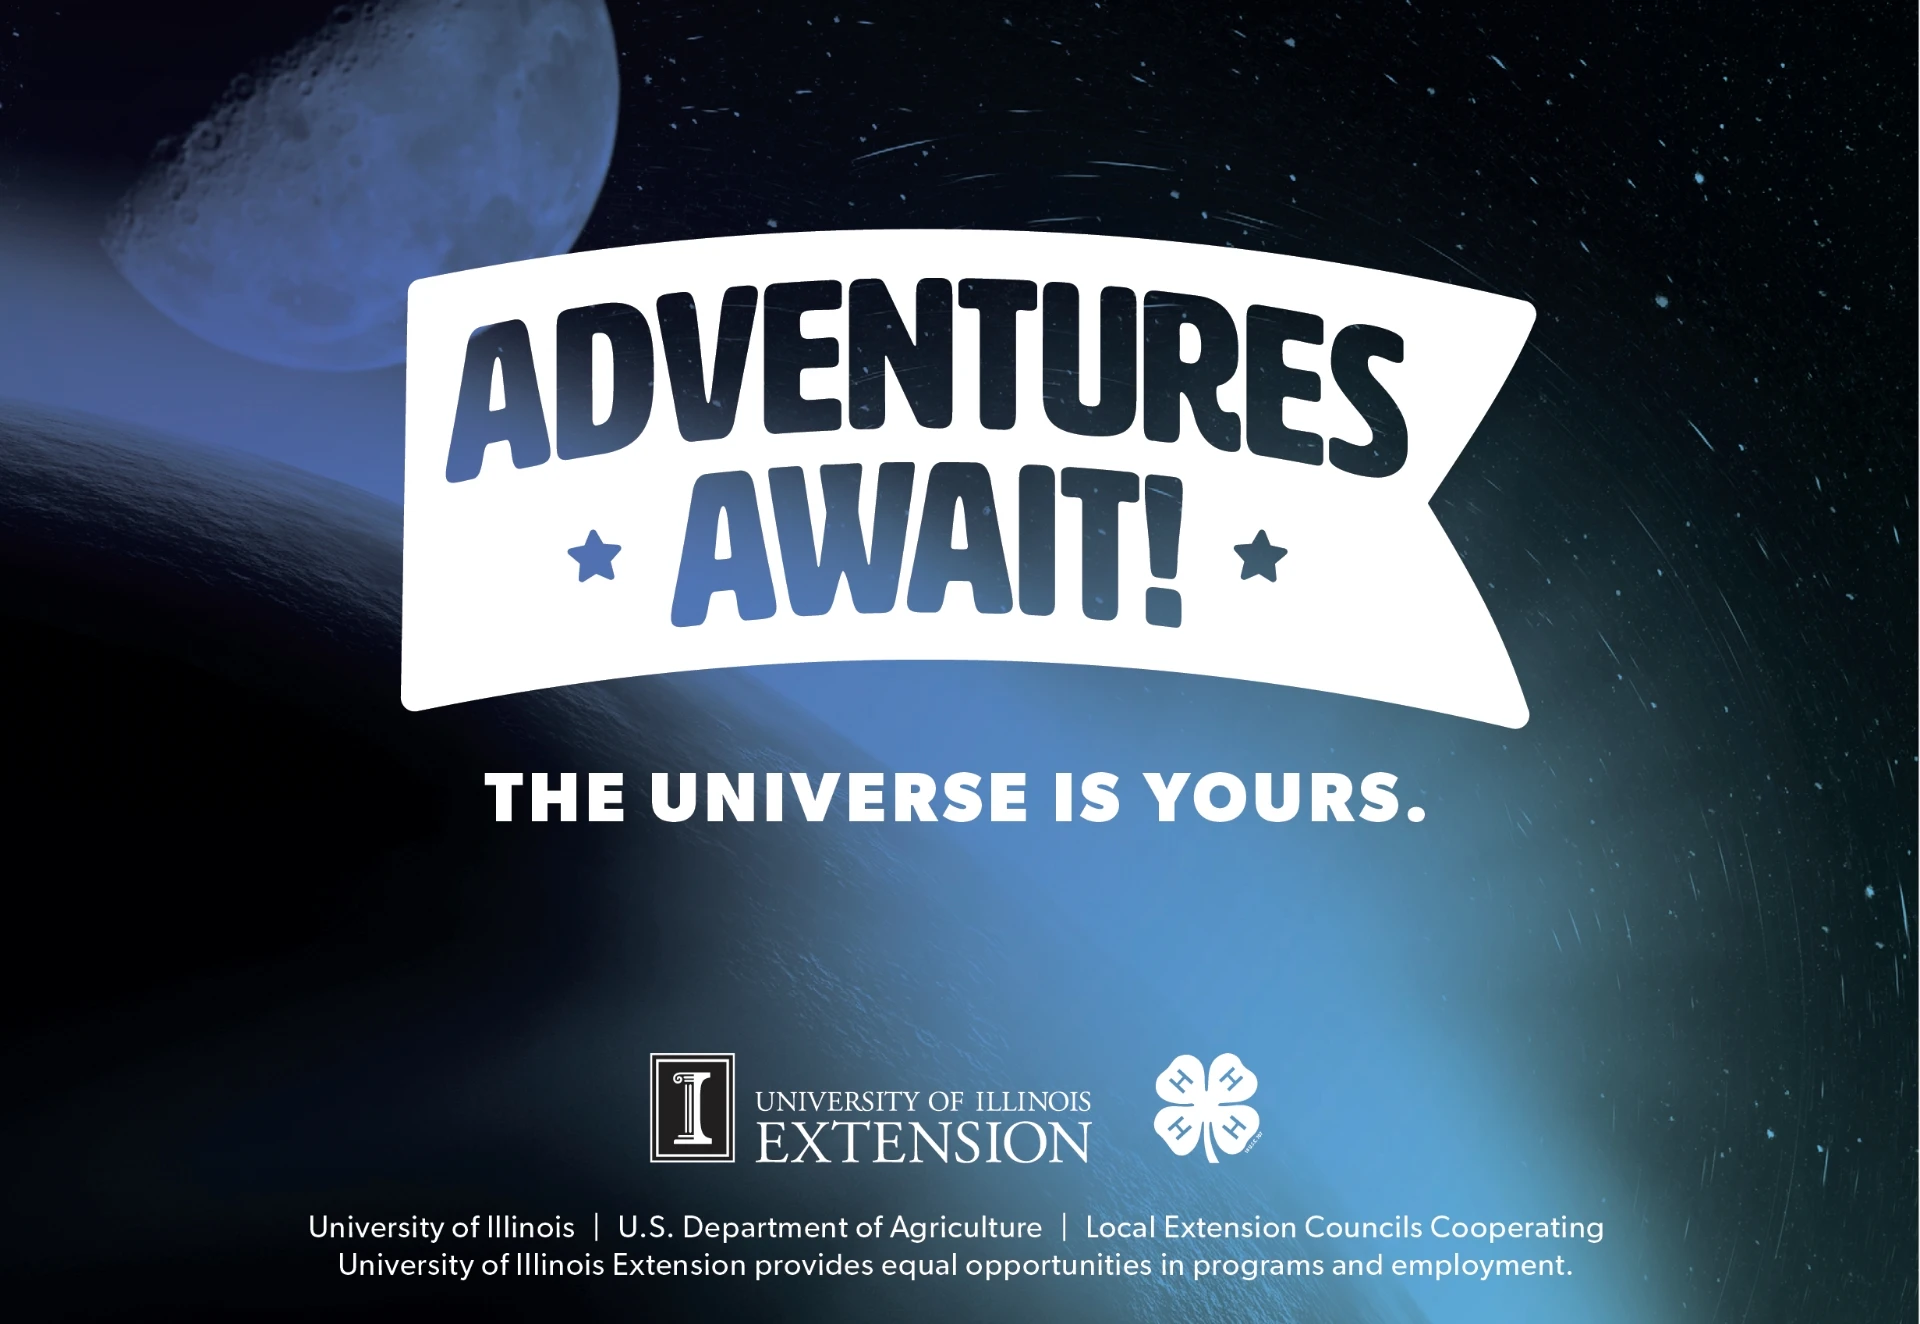 Adventures await the universe is yours.